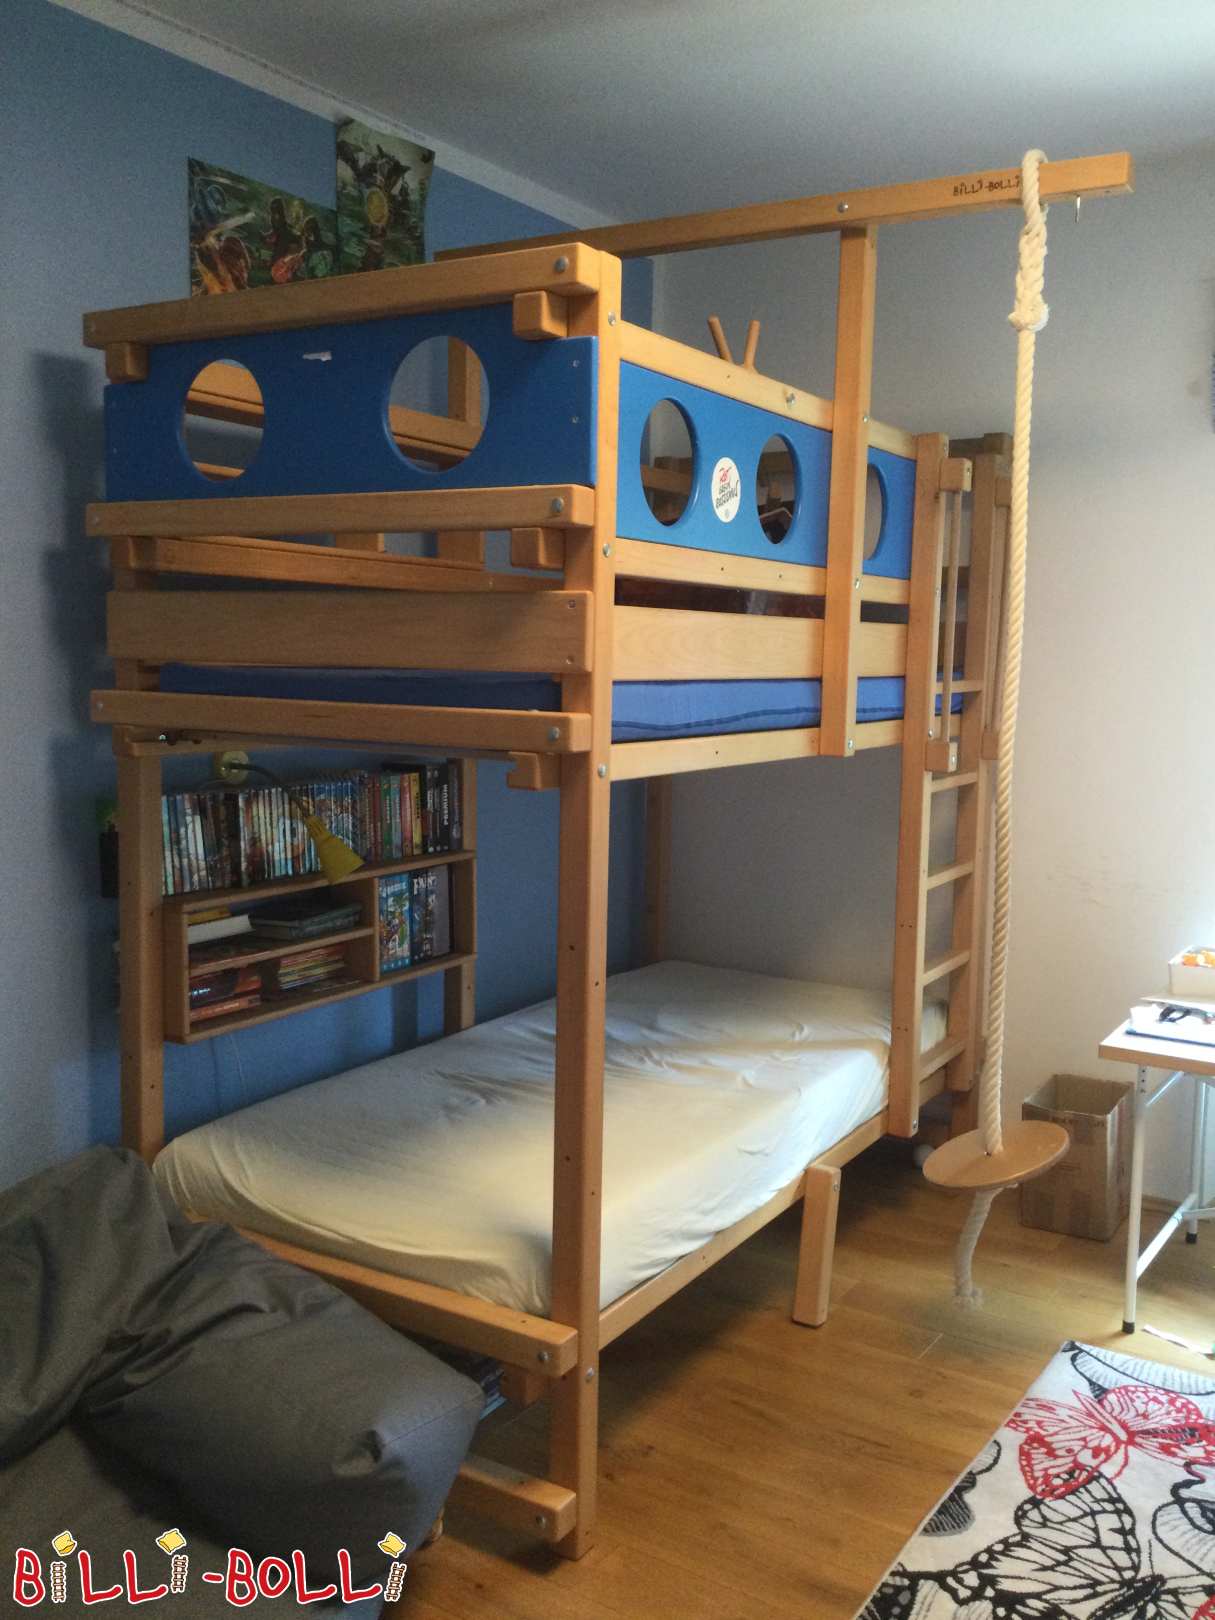 Bunk bed with bunk board, steering wheel, climbing rope, bookcase (Category: Bunk Bed pre-owned)